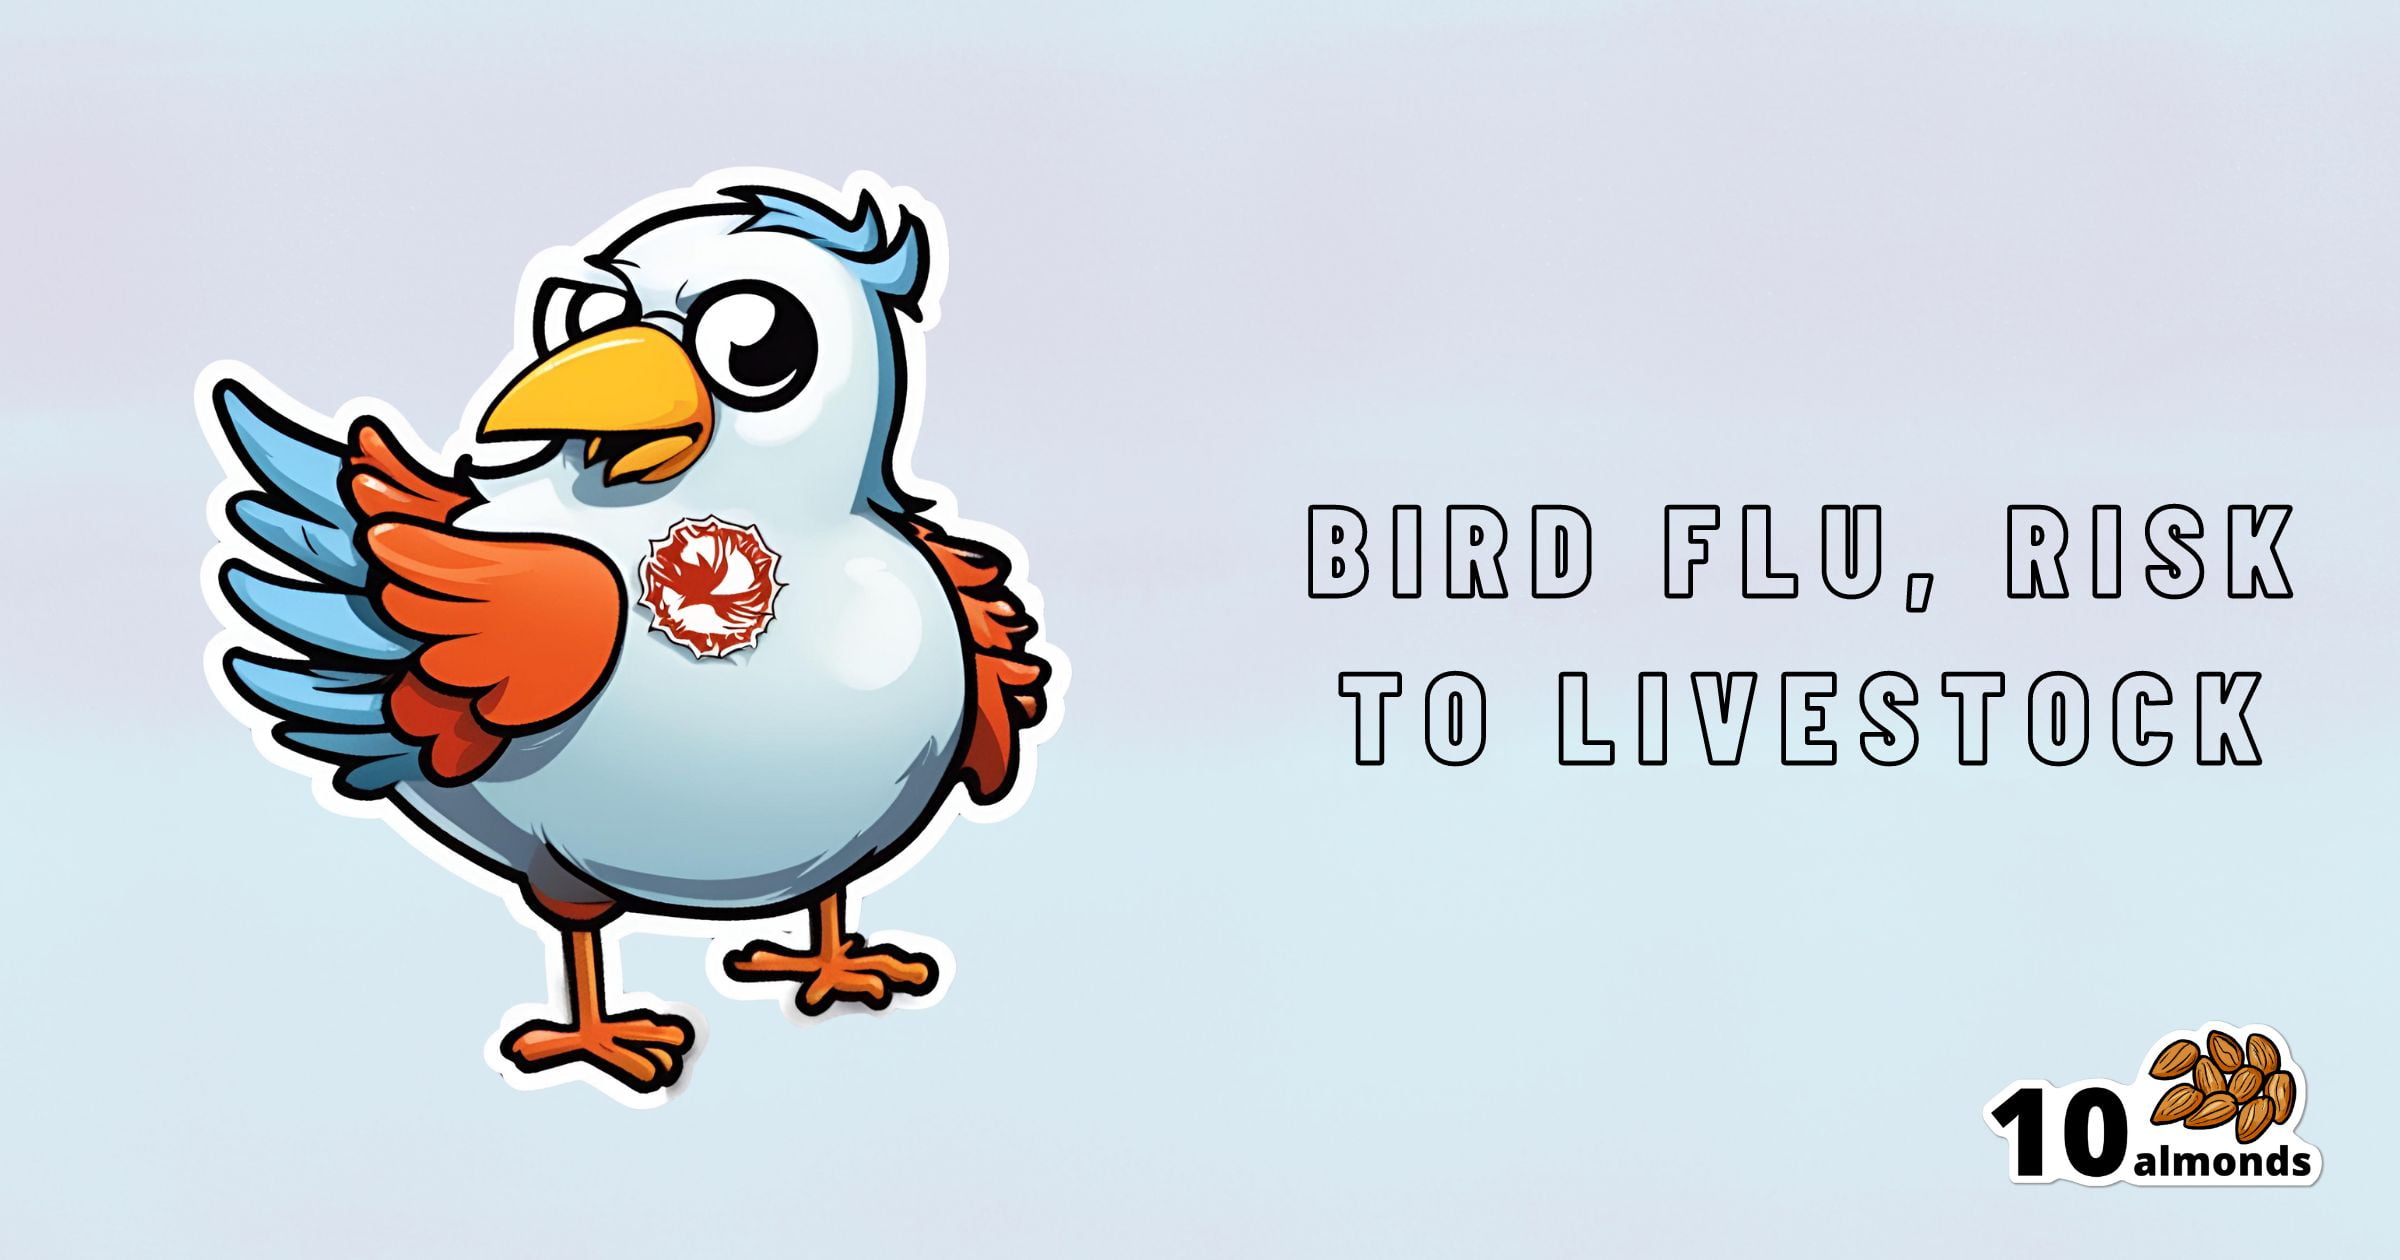 An illustrated cartoon bird with red and blue feathers and an annoyed expression is standing next to bold text that reads, "BIRD FLU, RISK TO POULTRY." The image is branded with "10 almonds" in the bottom right corner.